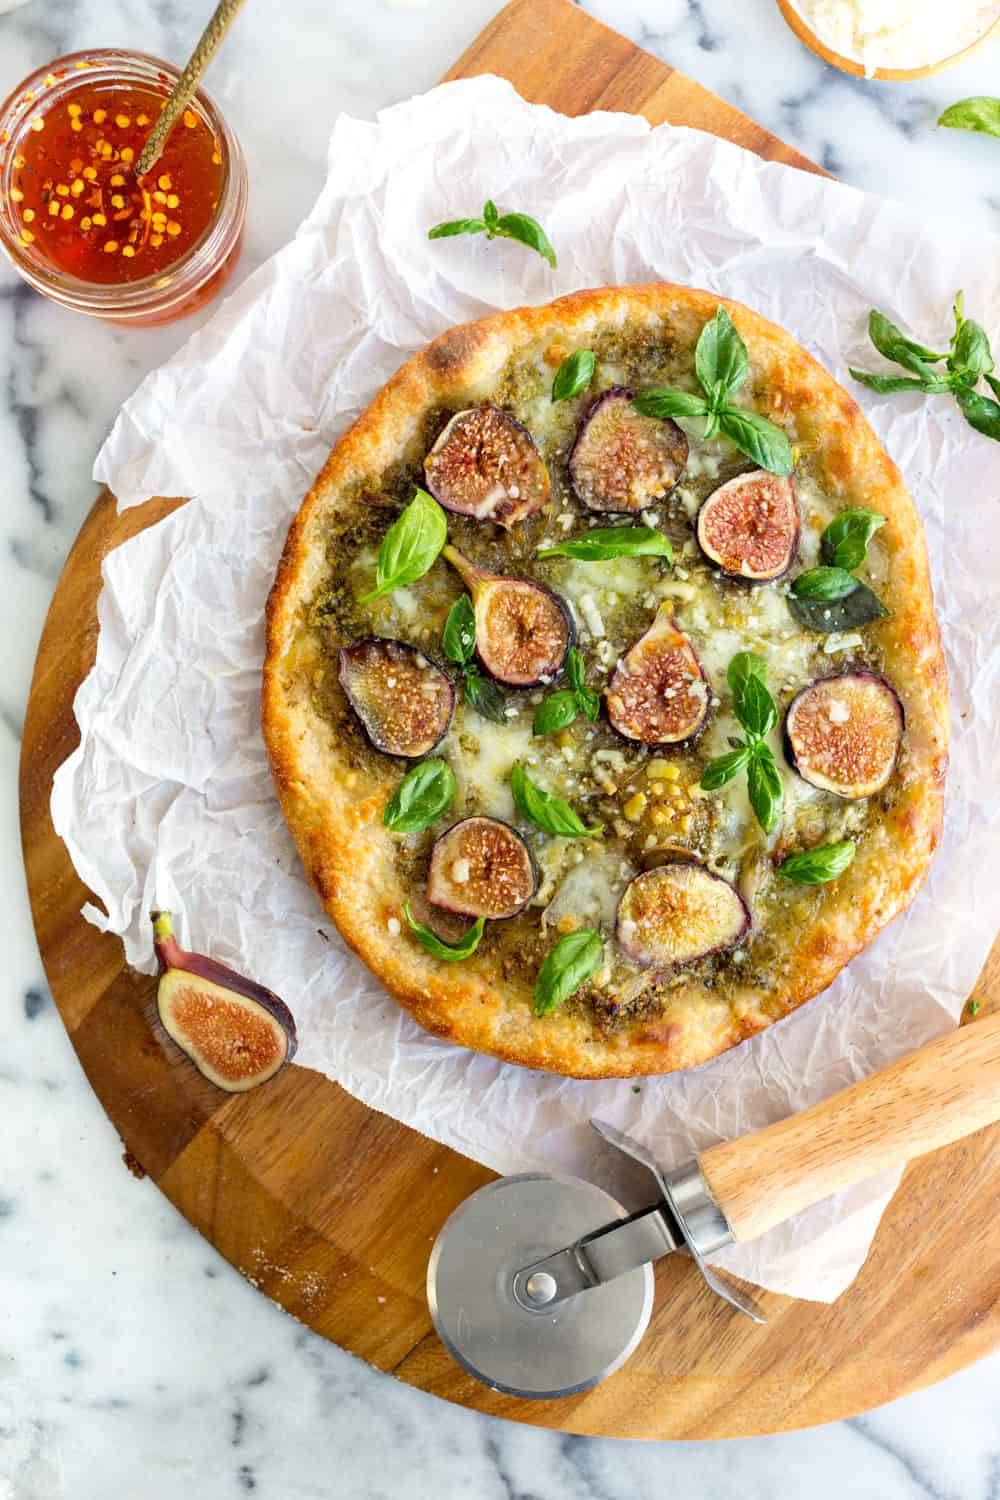 fig pizza with pistachio pesto from Baking the Goods